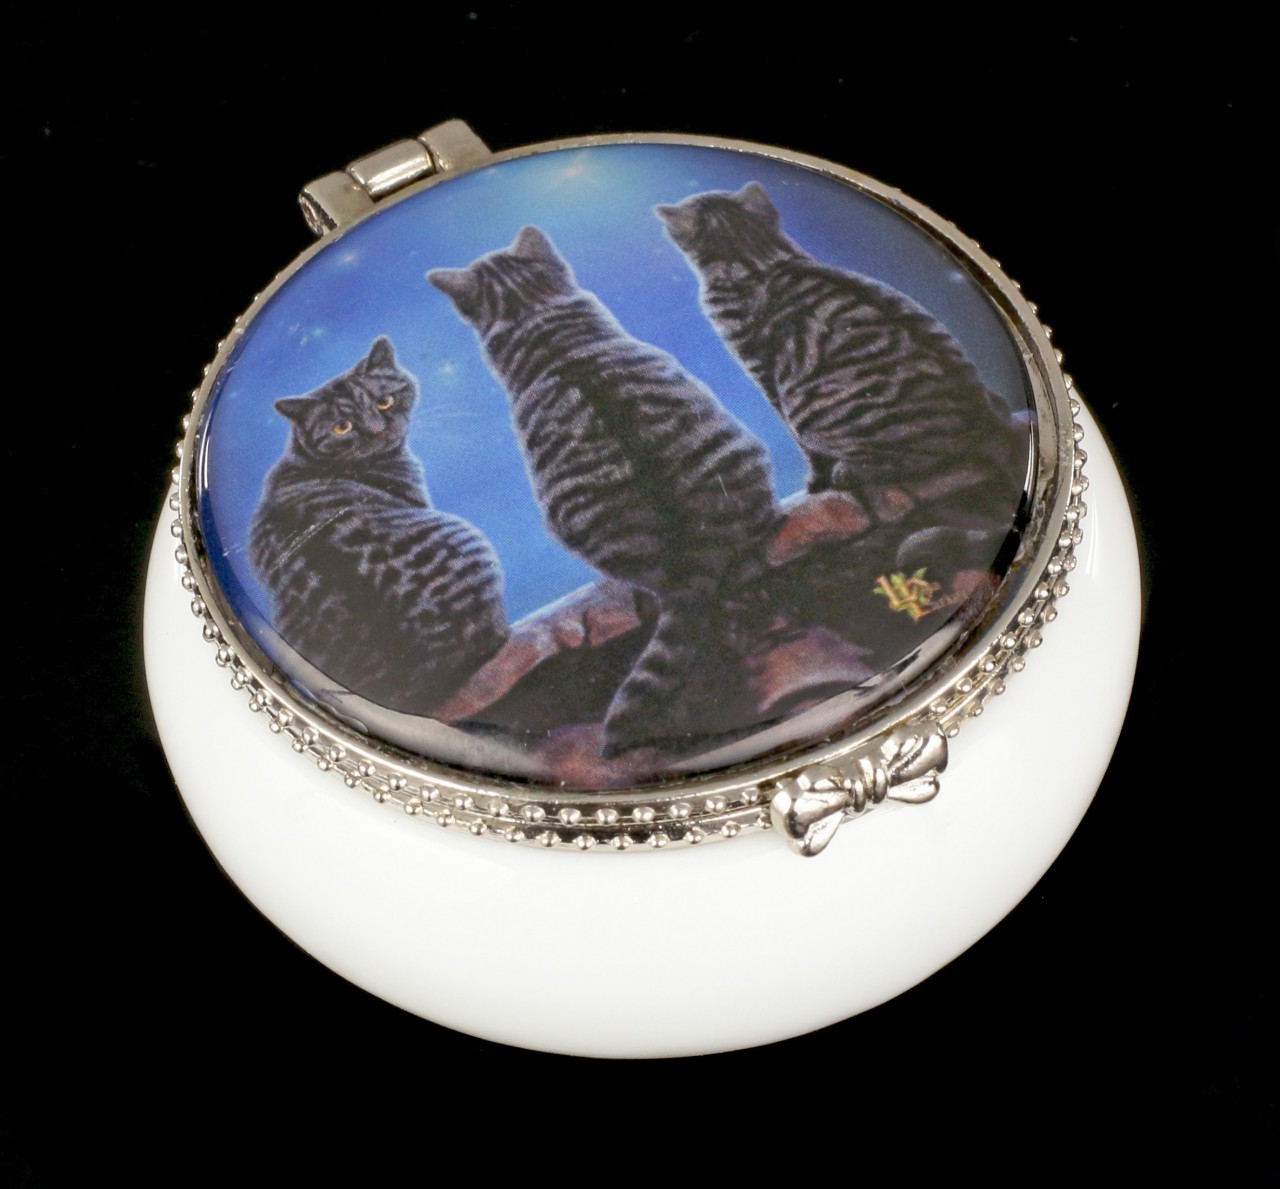 Trinket Box with Cats - Wish upon a Star